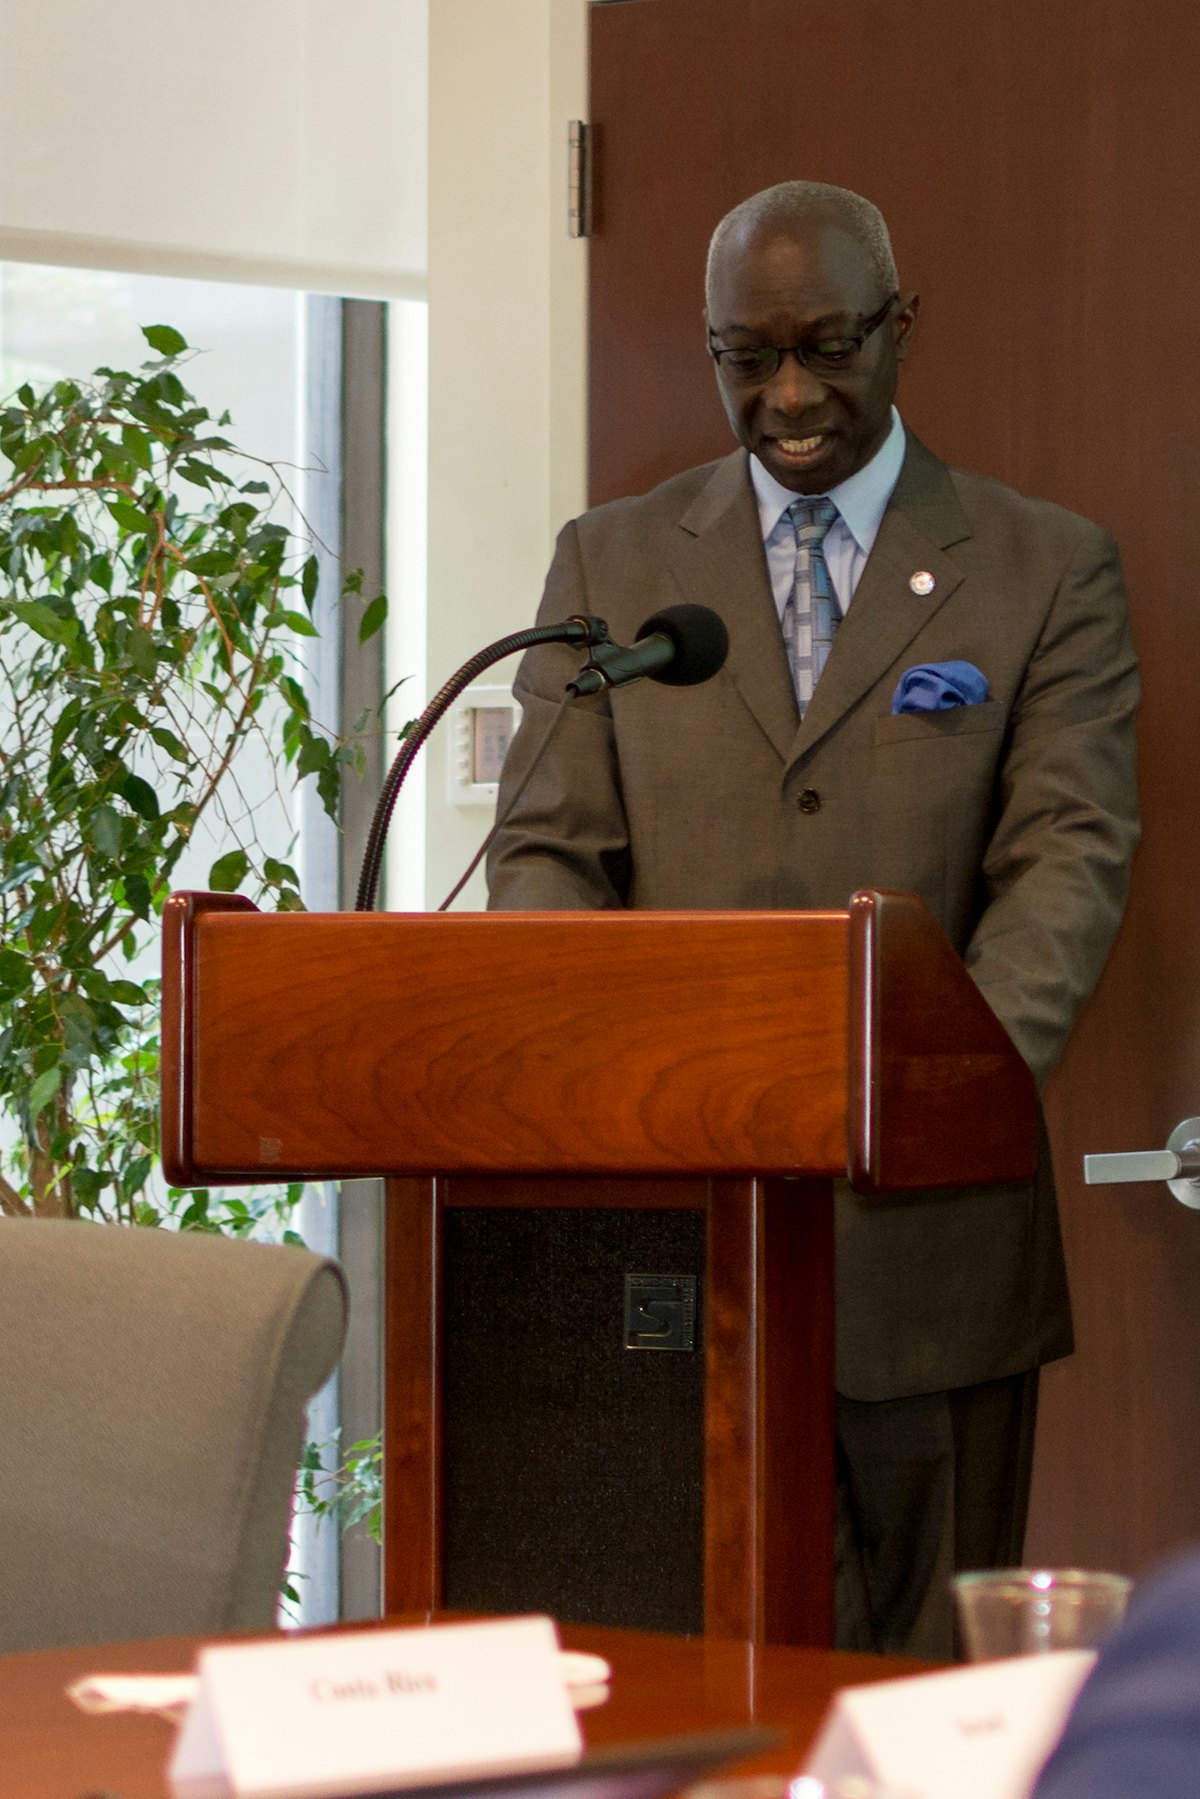 Adama Dieng, Special Adviser to the UN Secretary-General on the Prevention of Genocide, speaking yesterday at "Unseen Valor".